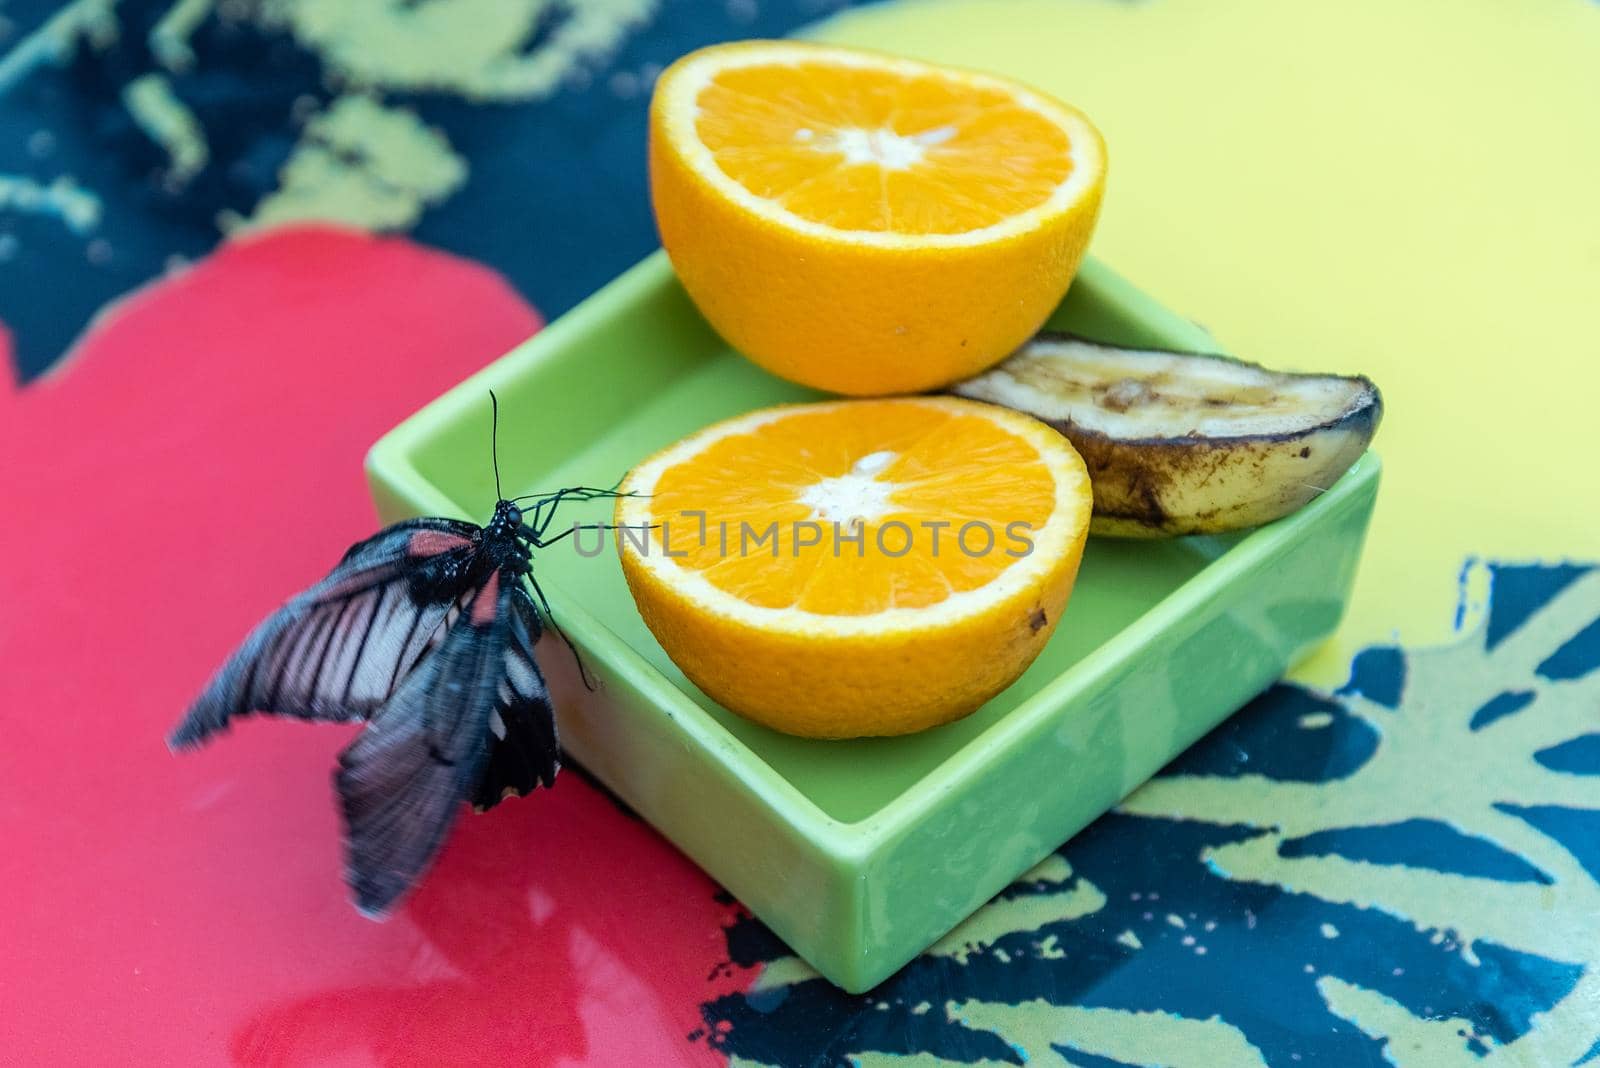 Papilio Lowi, tropical butterfly, eating from an orange by marcorubino